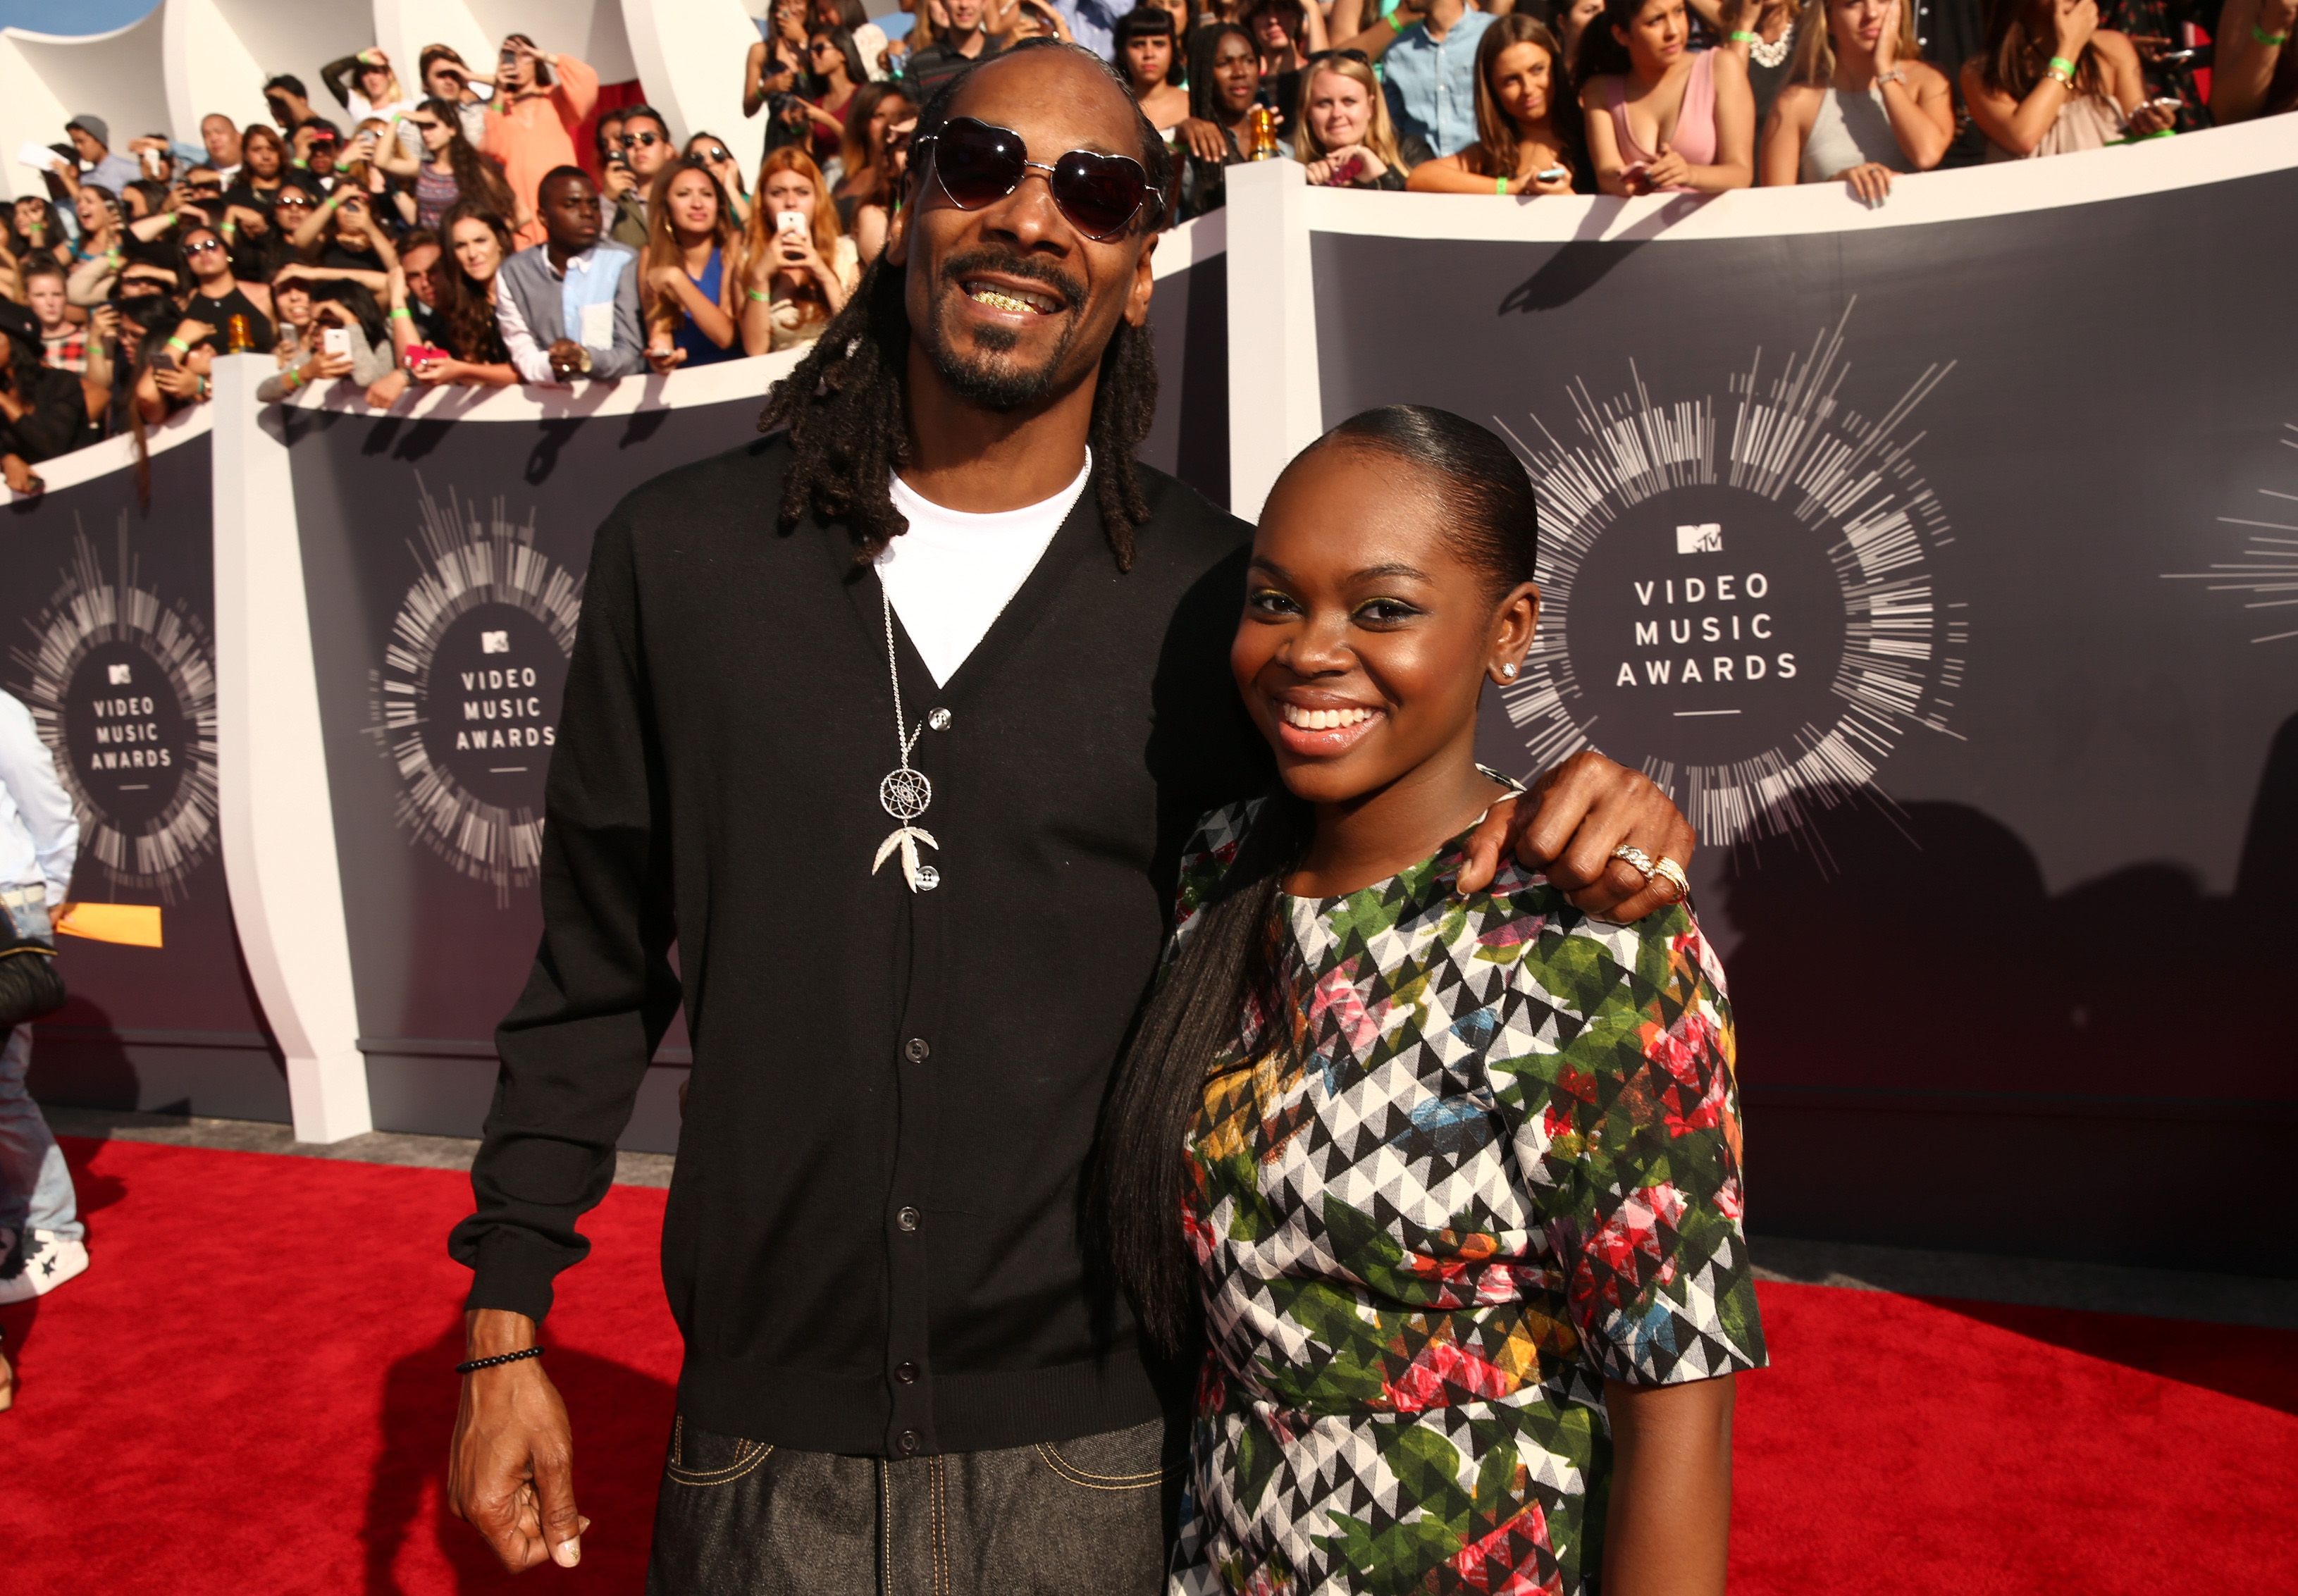 Snoop Dogg and Cori Broadus at the 2014 MTV Video Music Awards at The Forum on August 24, 2014 | Photo: Getty Images